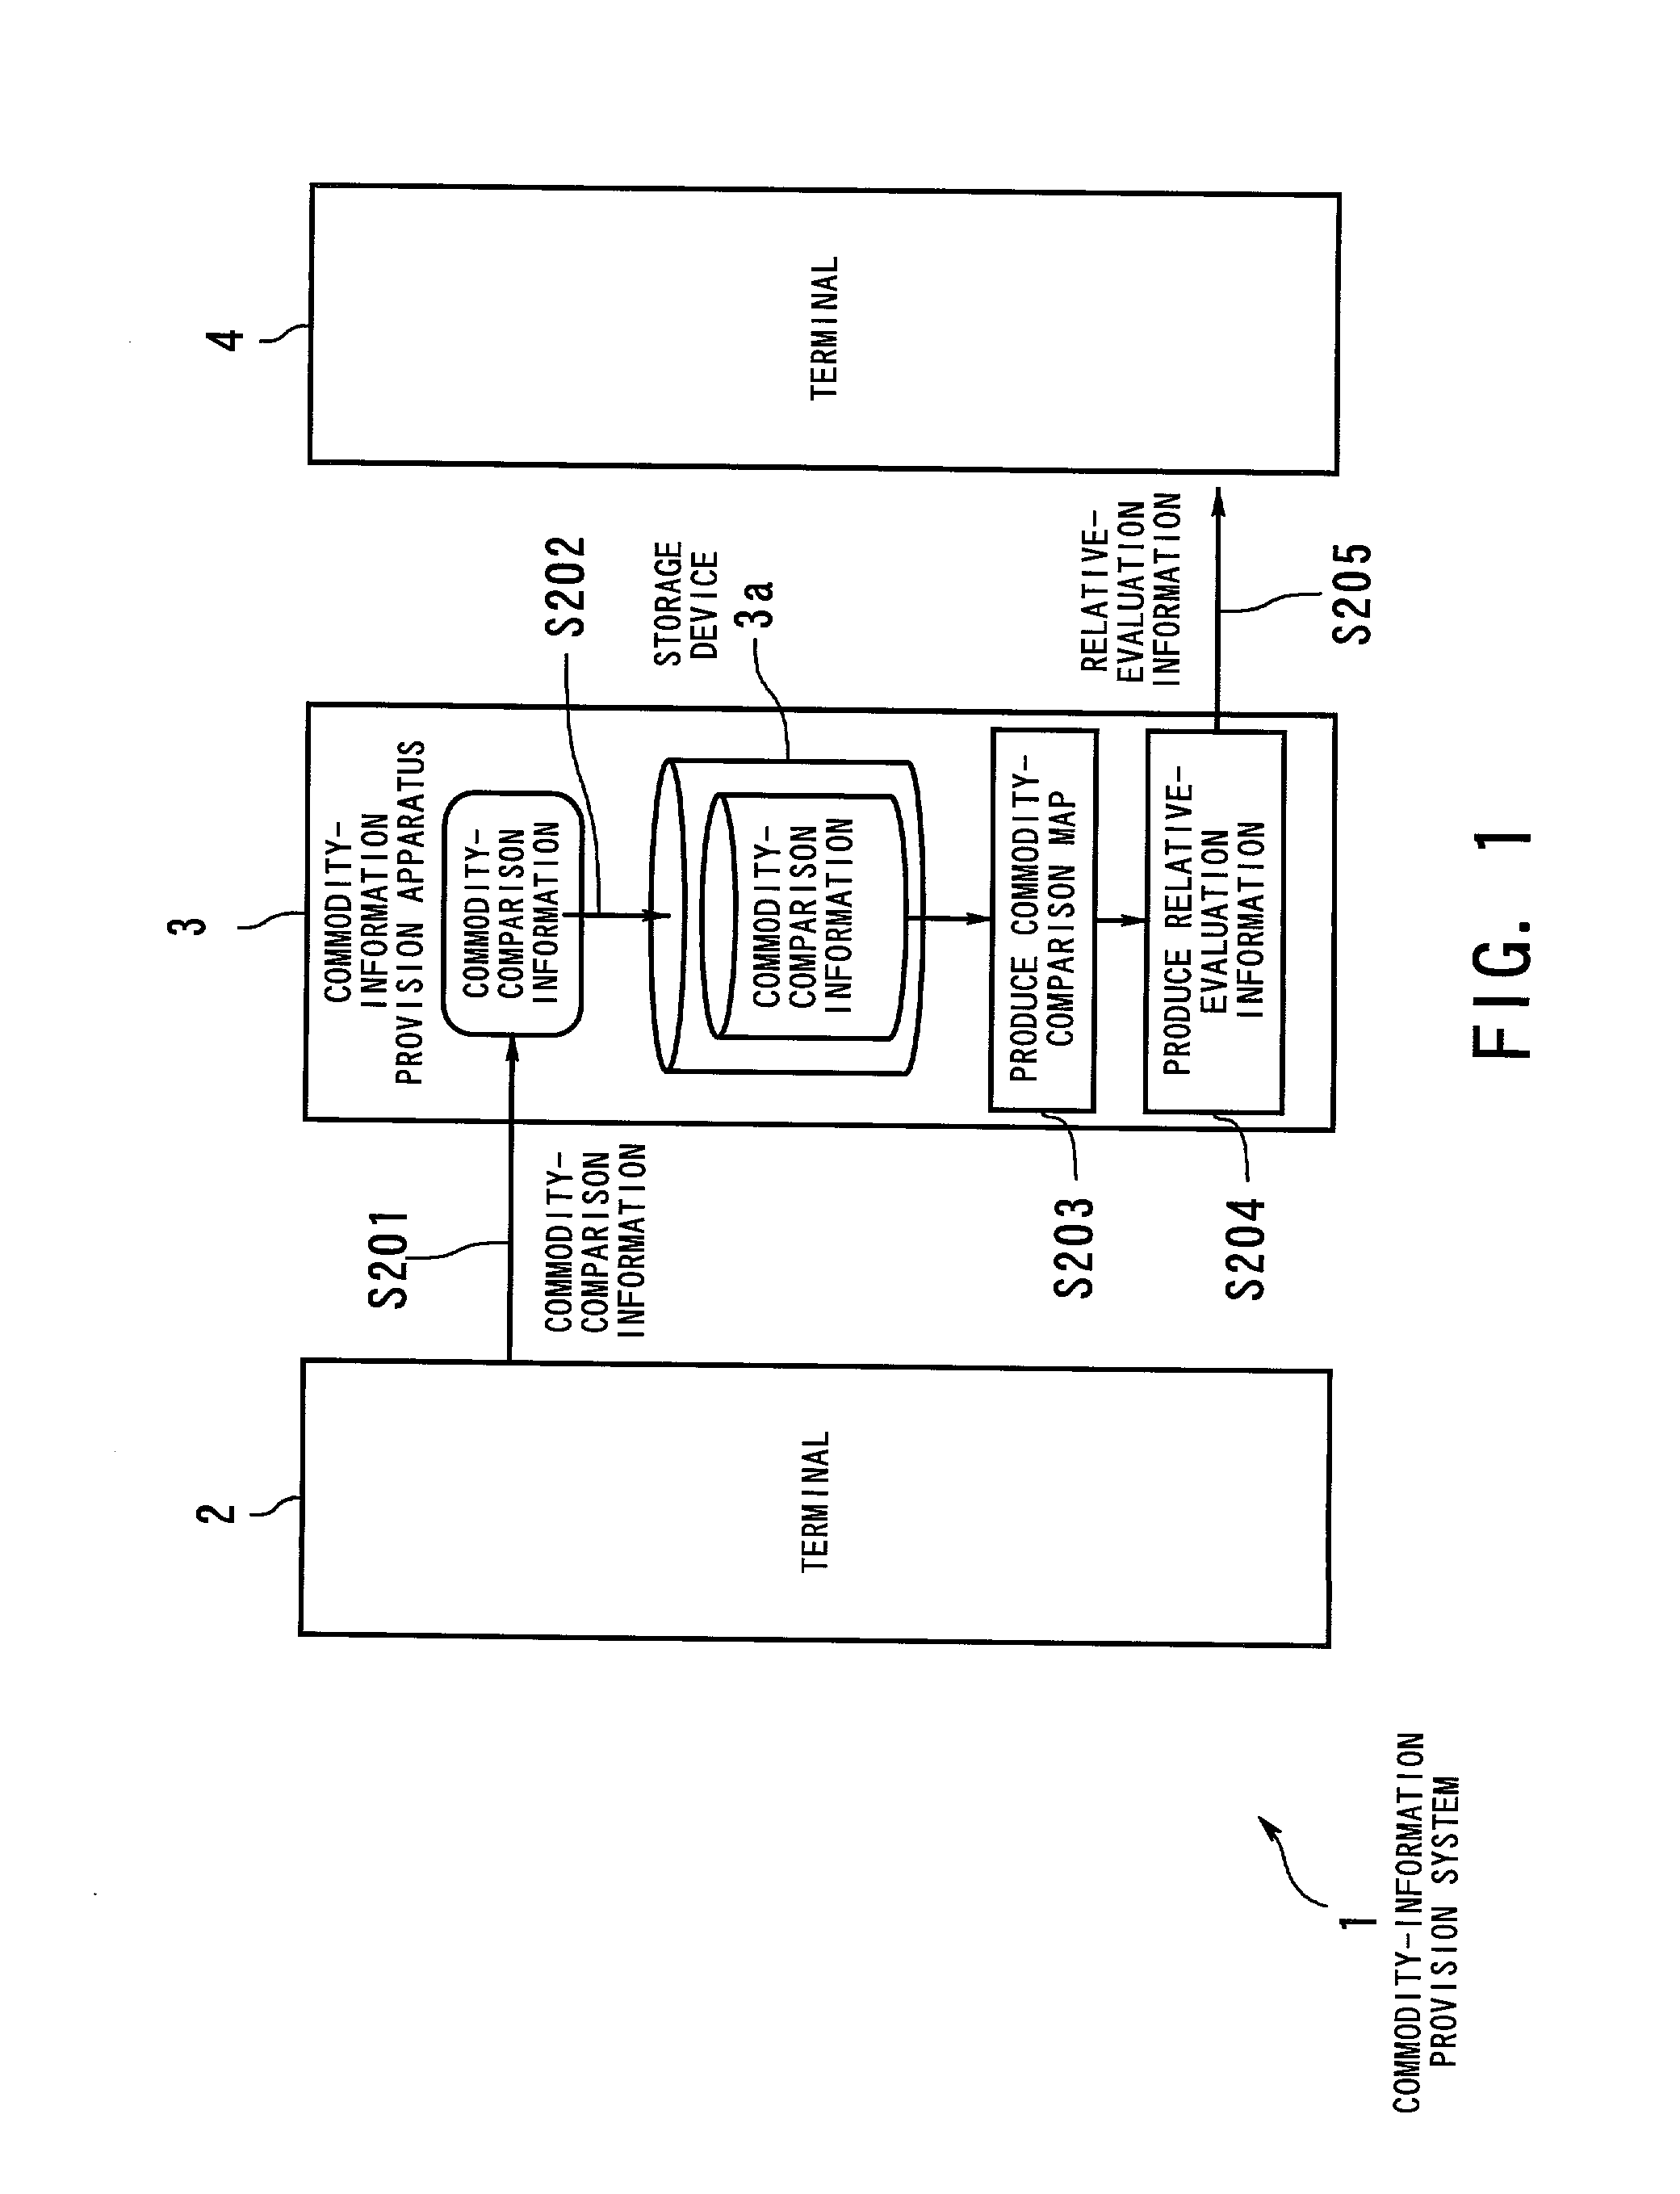 Method and apparatus for providing relative-evaluations of commodities to user by using commodity-comparison map